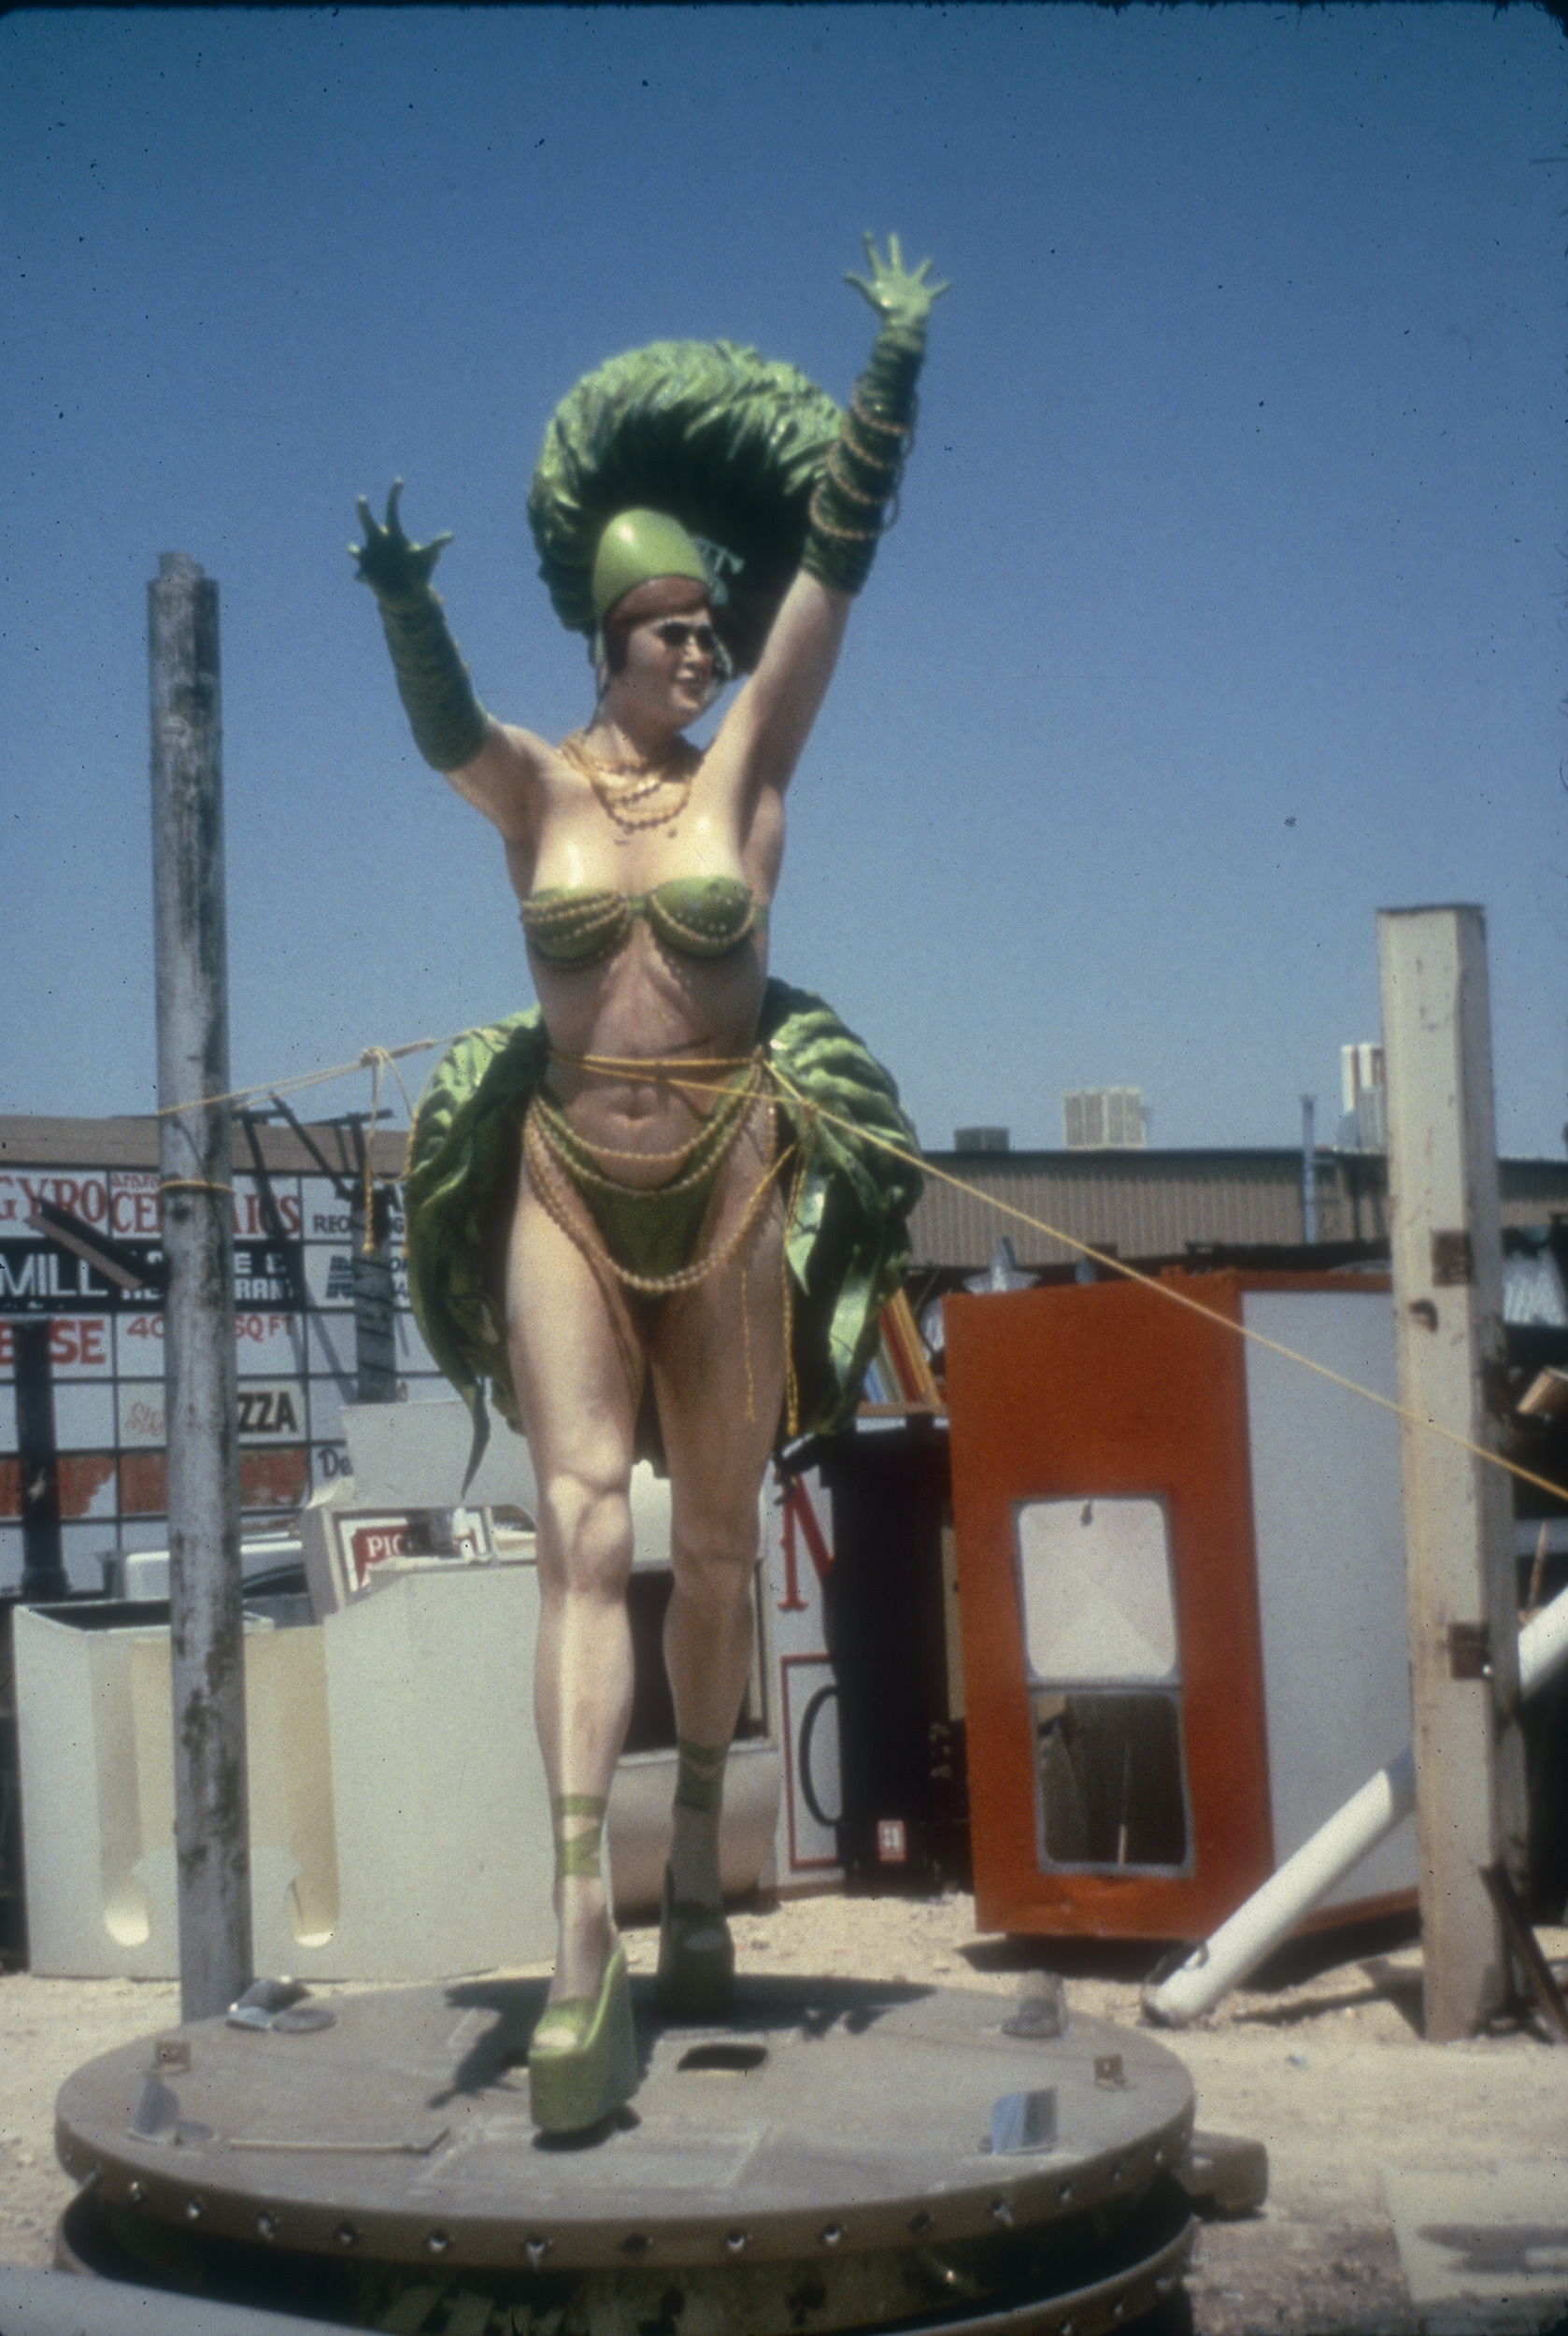 Slide of the Young Electric Sign Company (YESCO) sign graveyard, Las Vegas, circa 1980